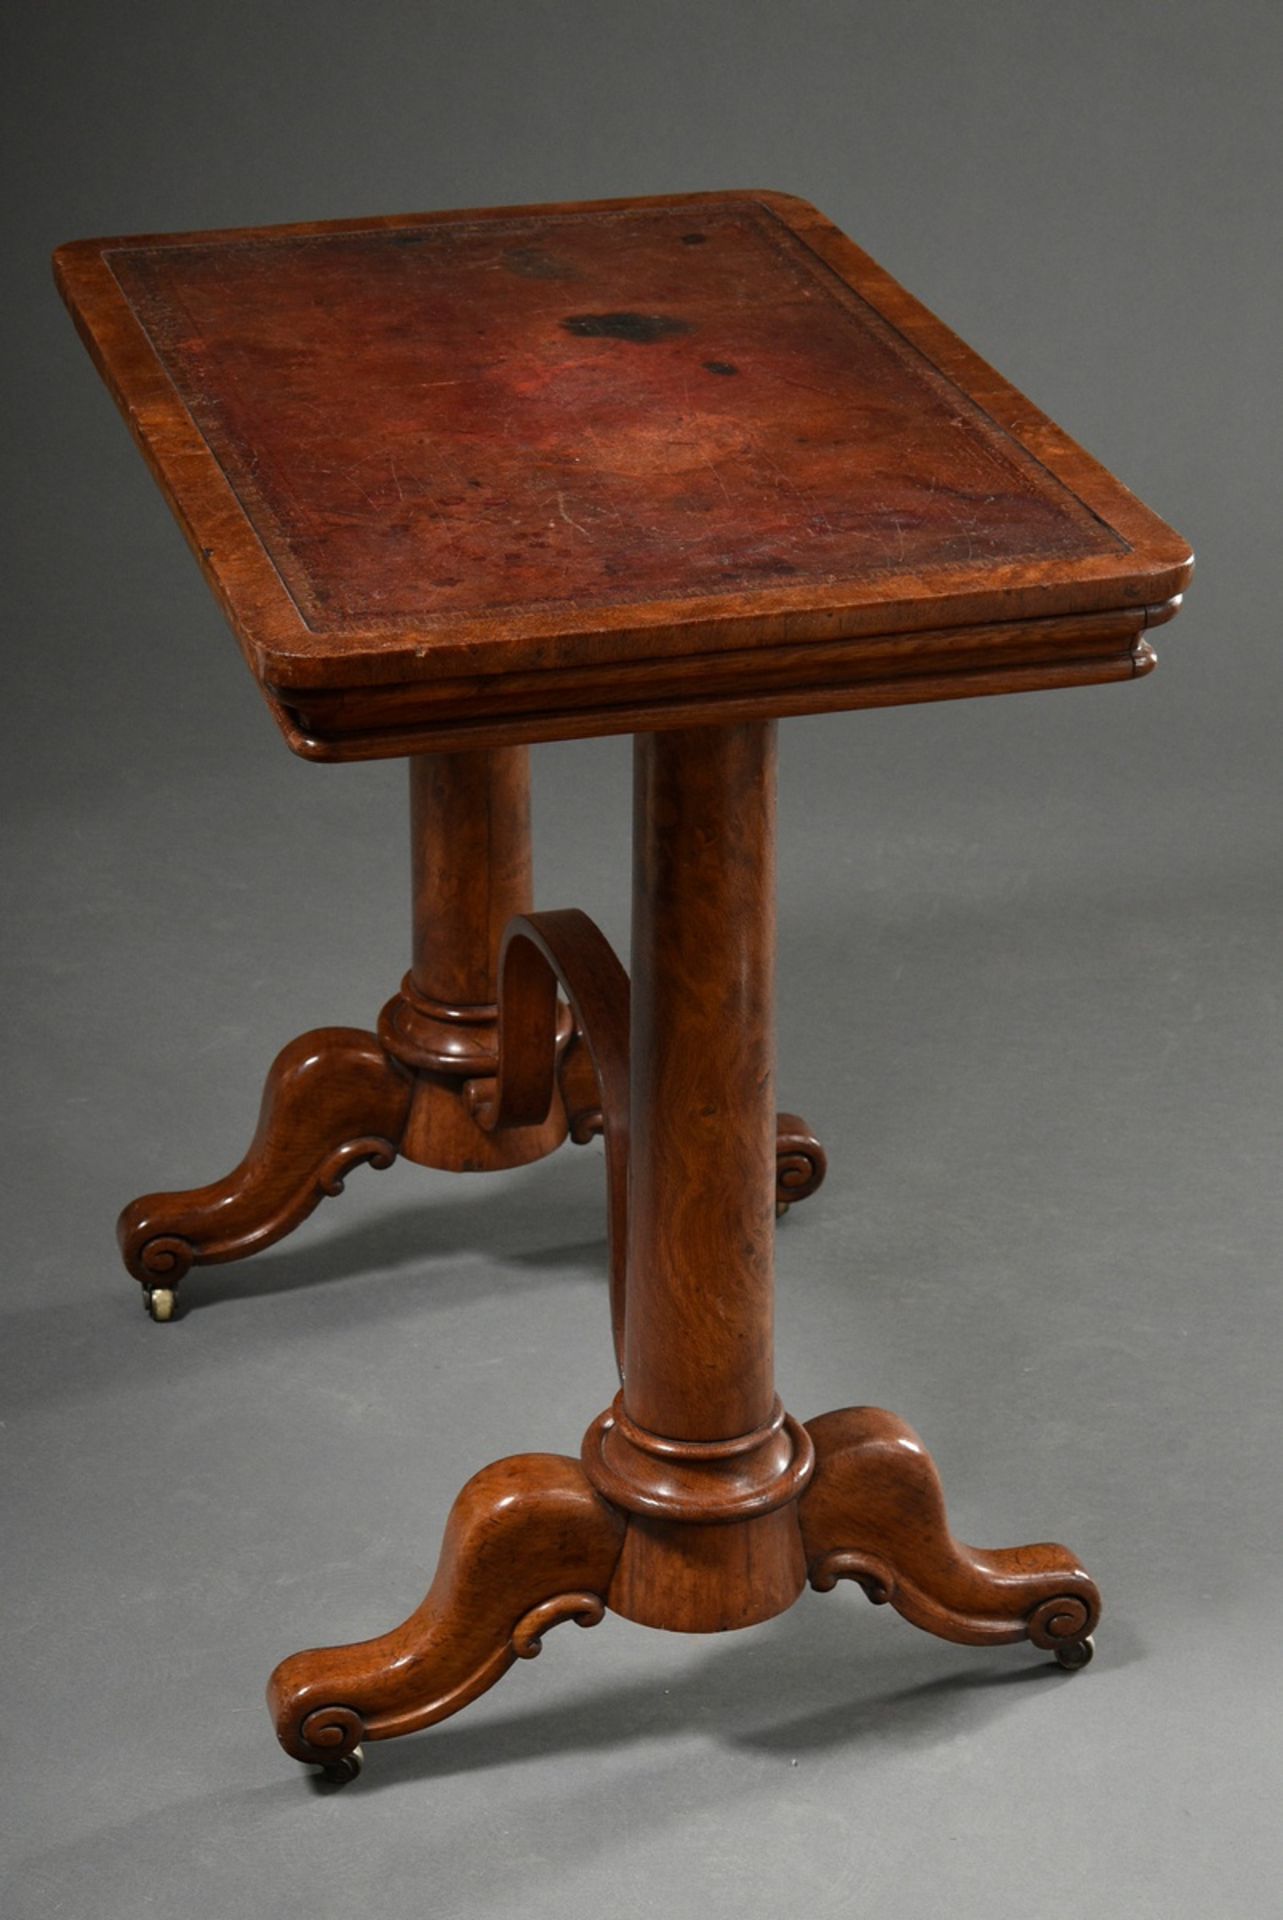 Small card table with cheek frame and curved bridge connection on metal castors, top with stand-up - Image 2 of 4